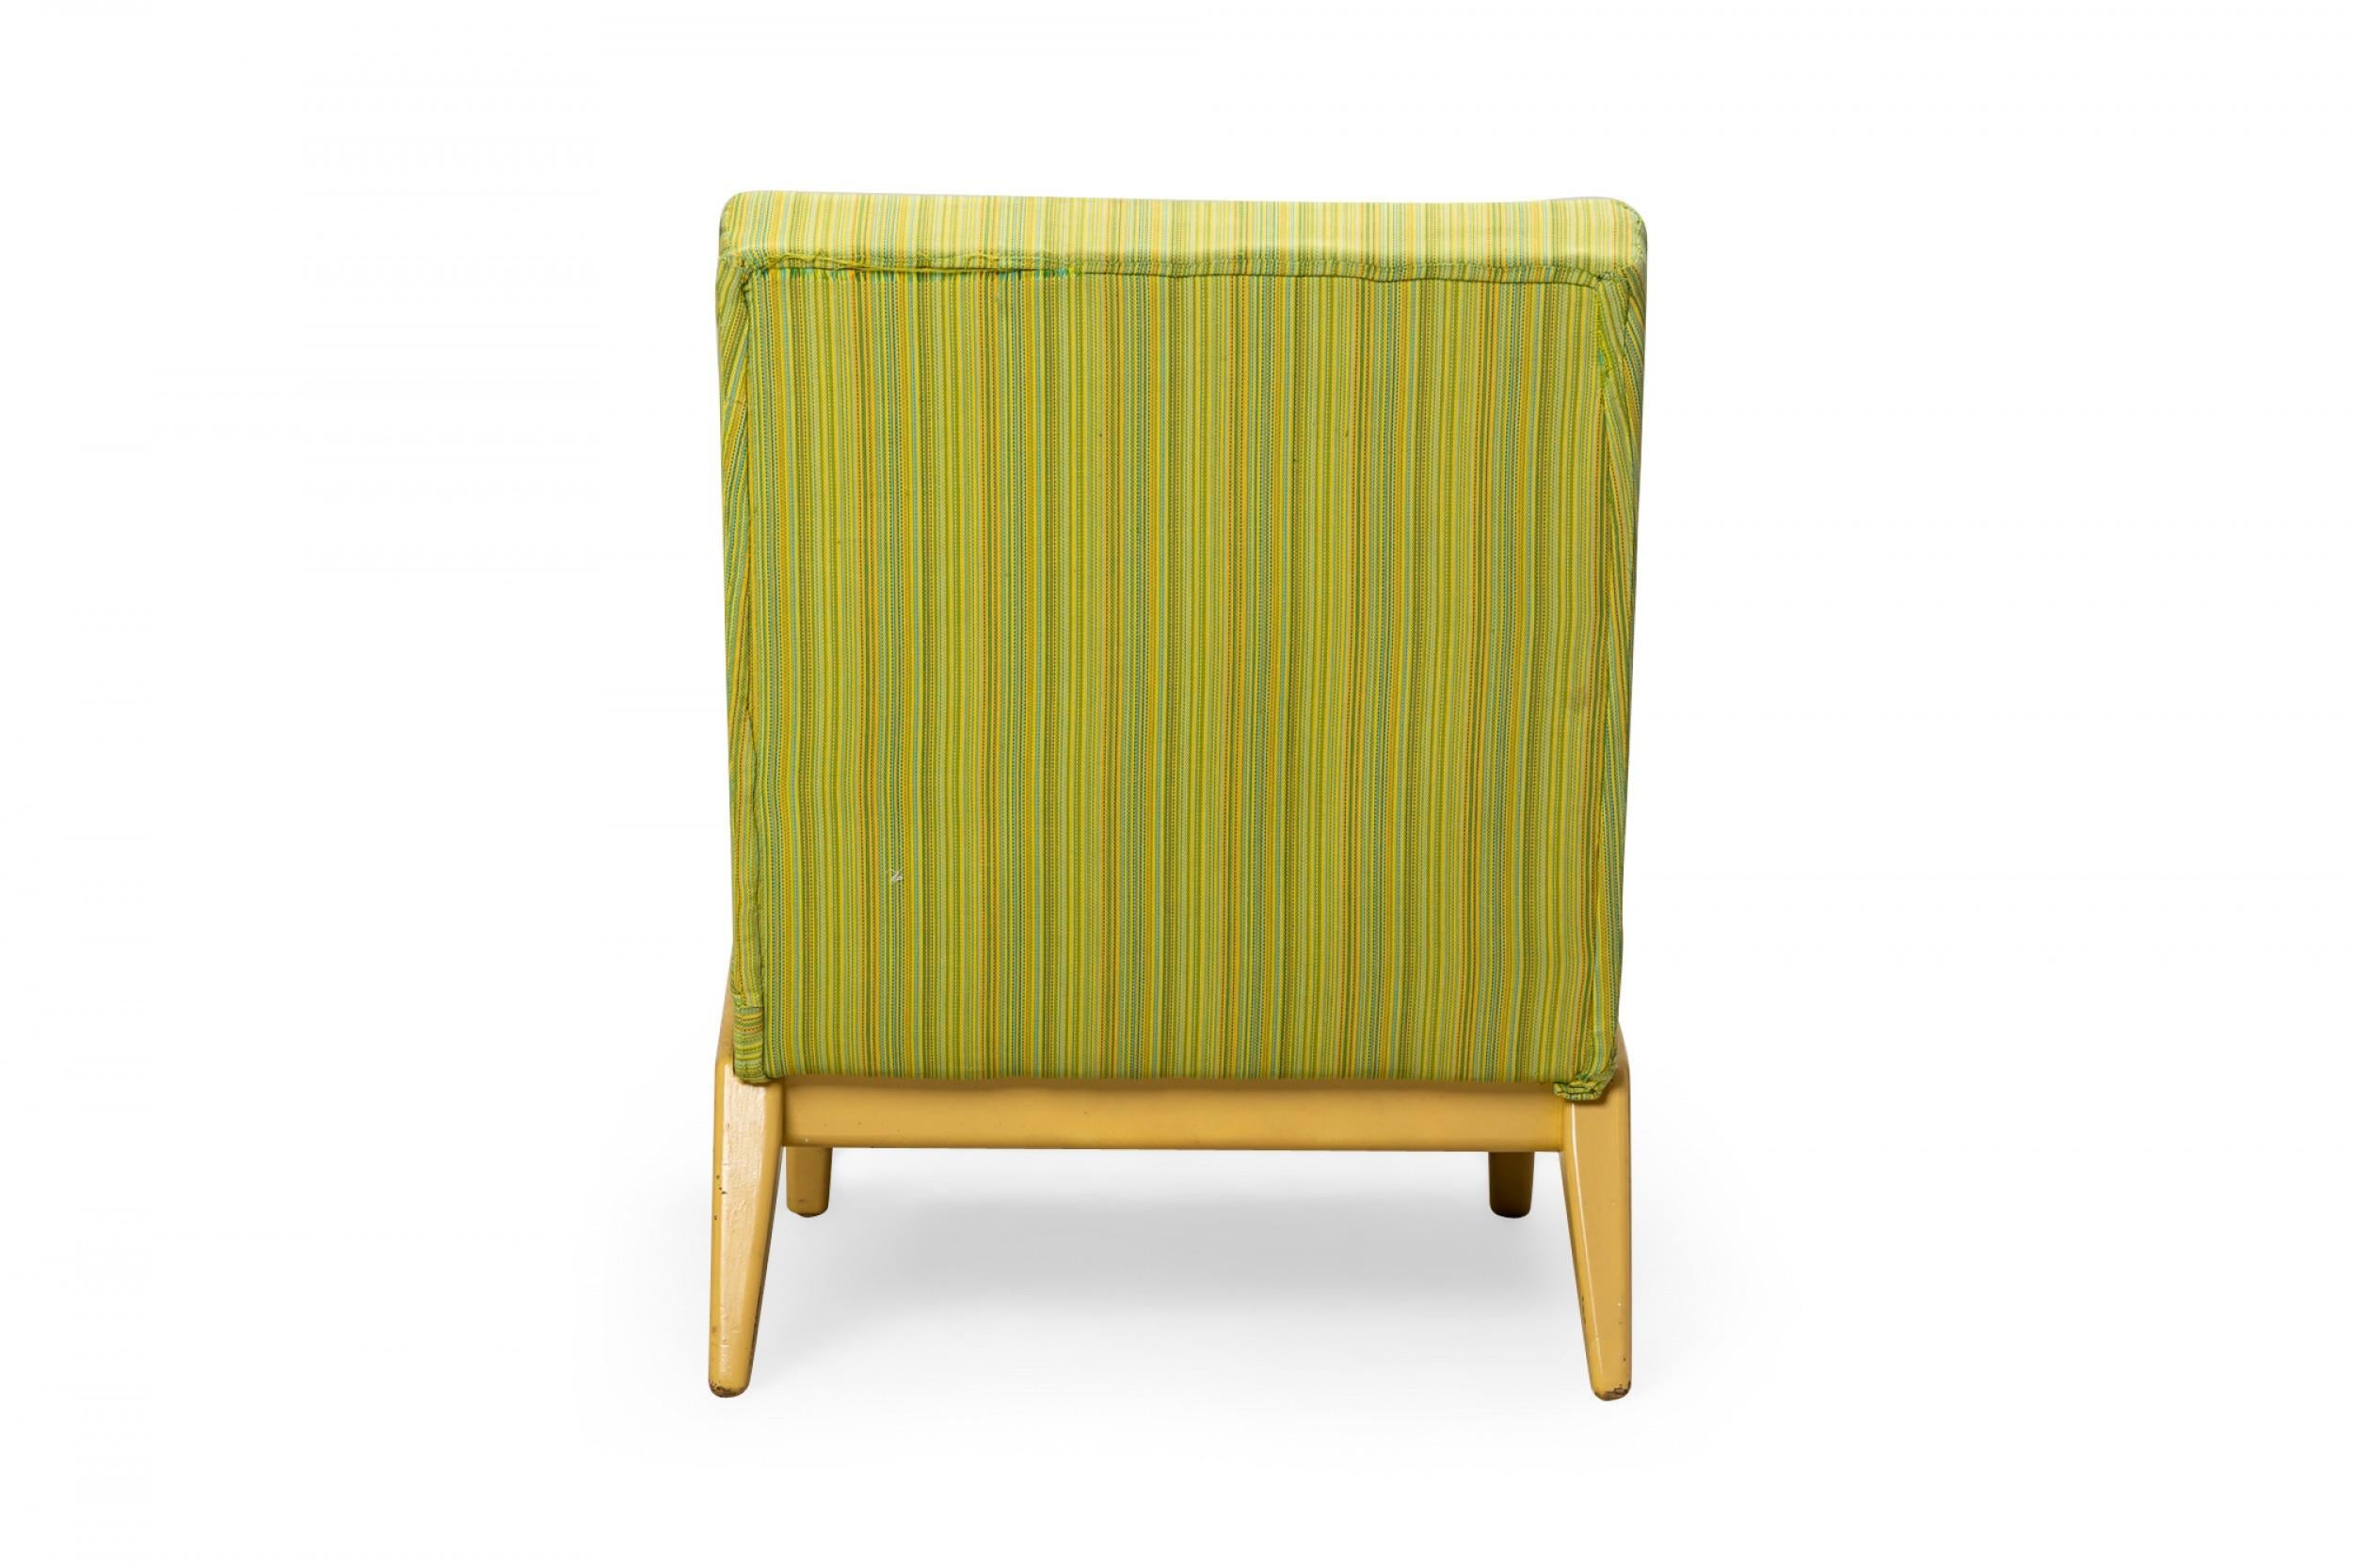 Jens Risom for Knoll Lime Green Striped Upholstered Blonde Wood Slipper In Good Condition For Sale In New York, NY